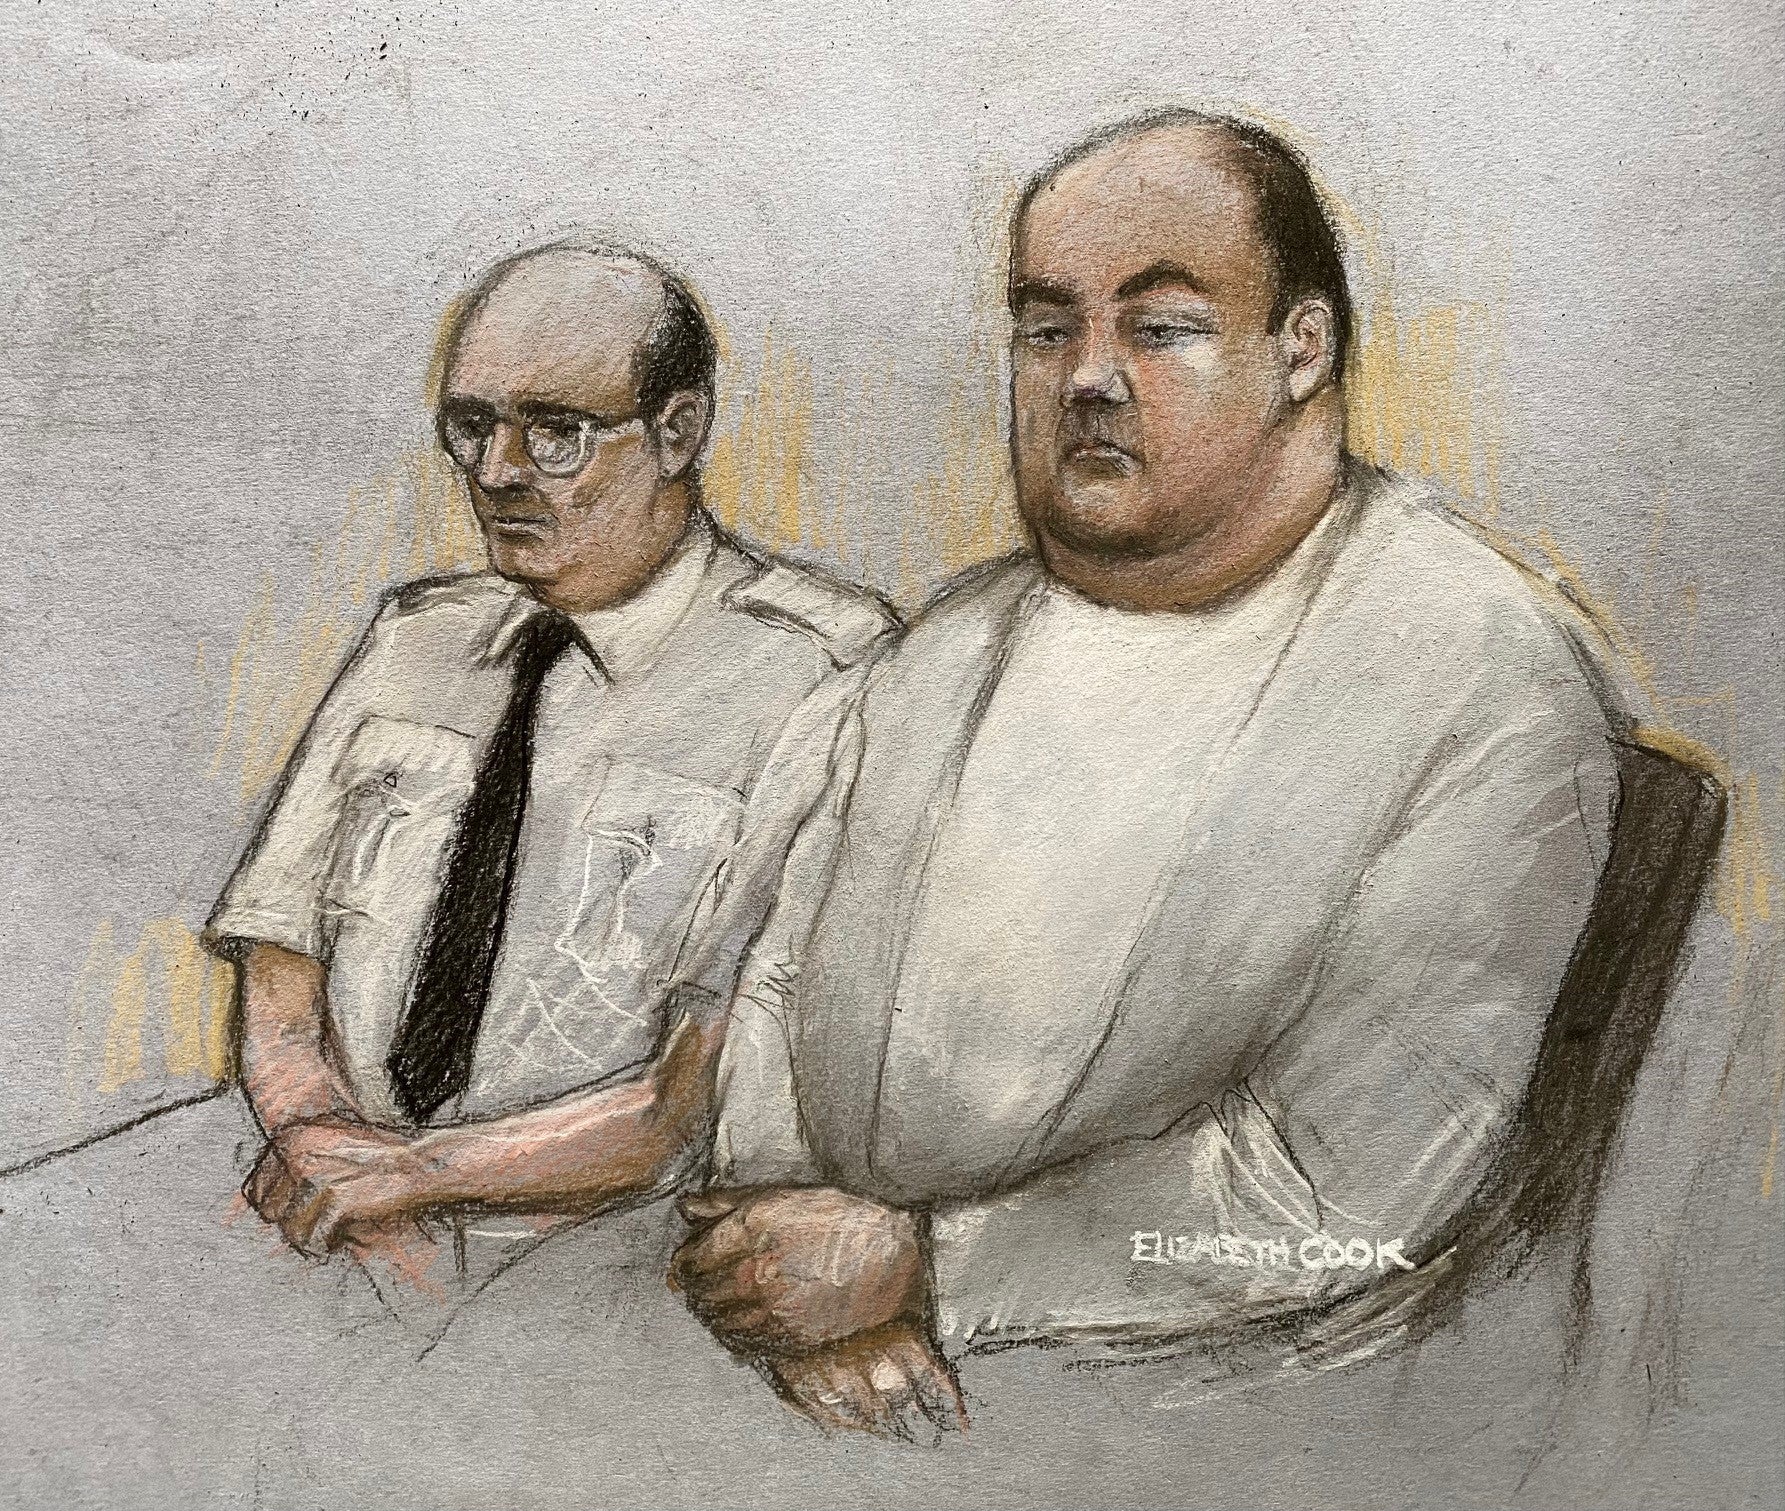 Gavin Plumb's Court Sketch at Chelmsford Crown Court